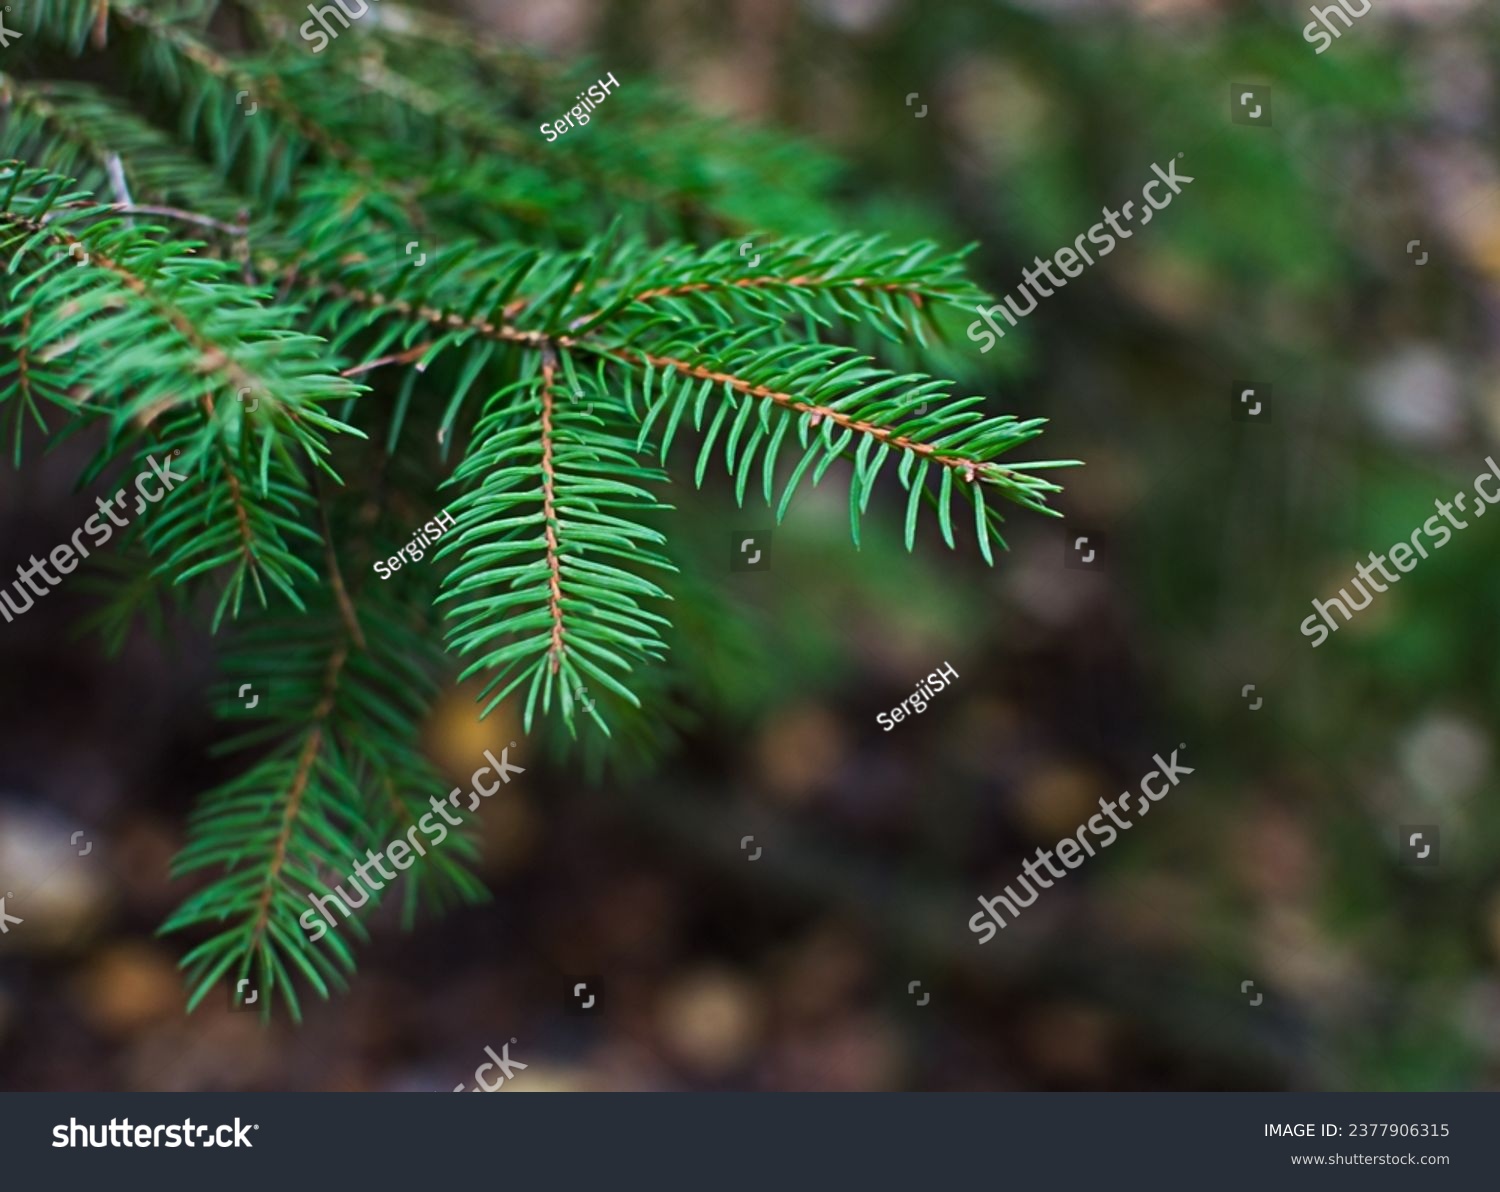 Green spruce branch on a blurred background, natural background with copy space close-up #2377906315